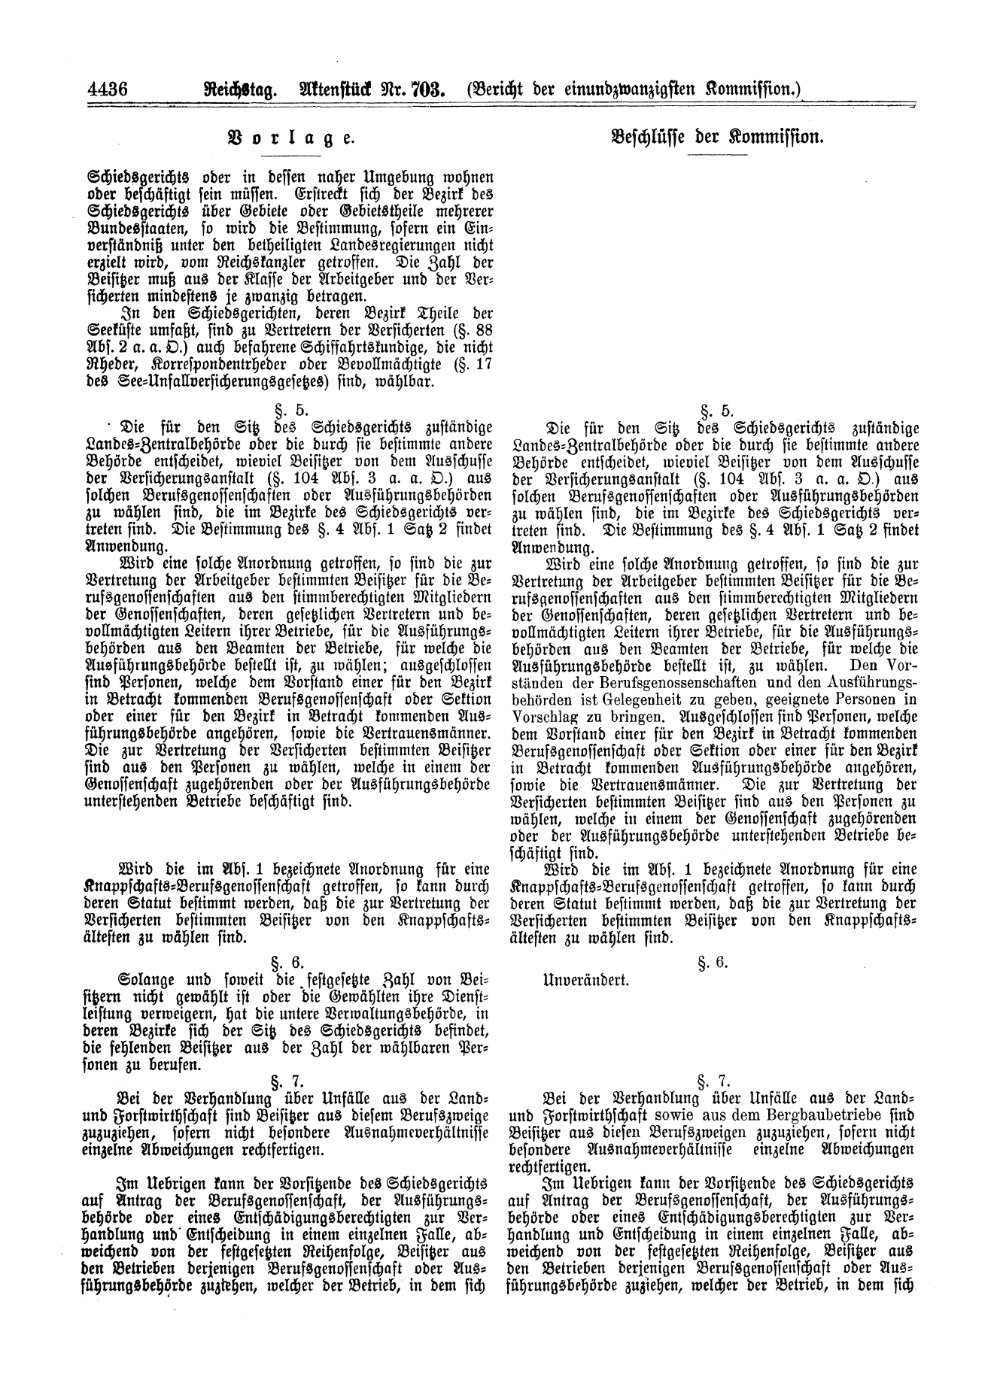 Scan of page 4436